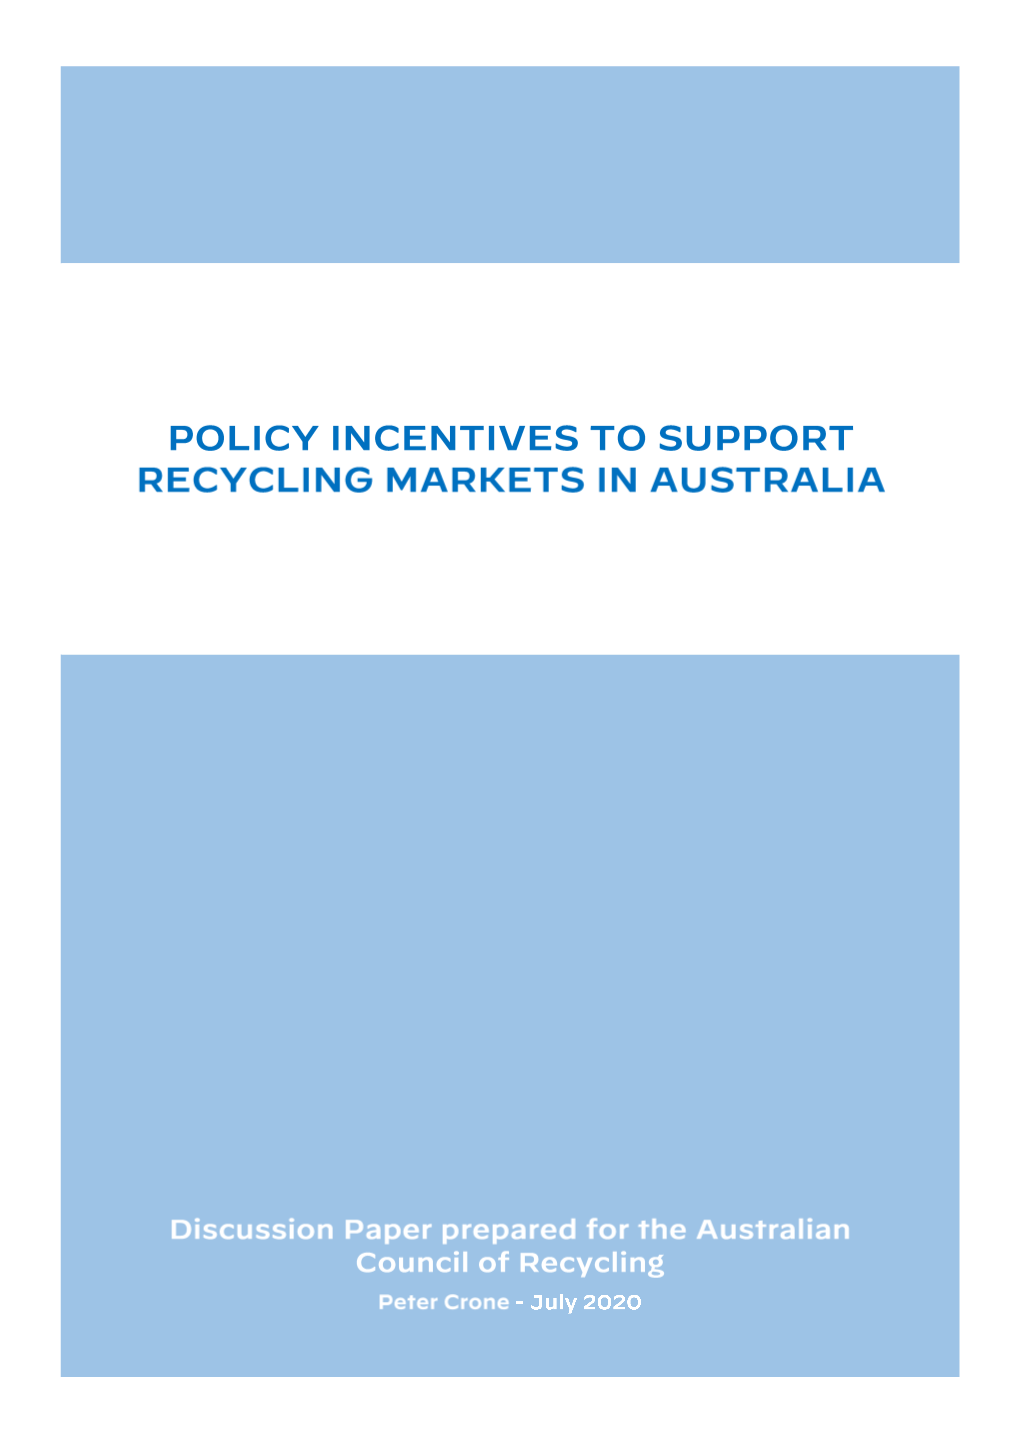 Discussion Paper: Policy Incentives to Support Recycling Markets in Australia